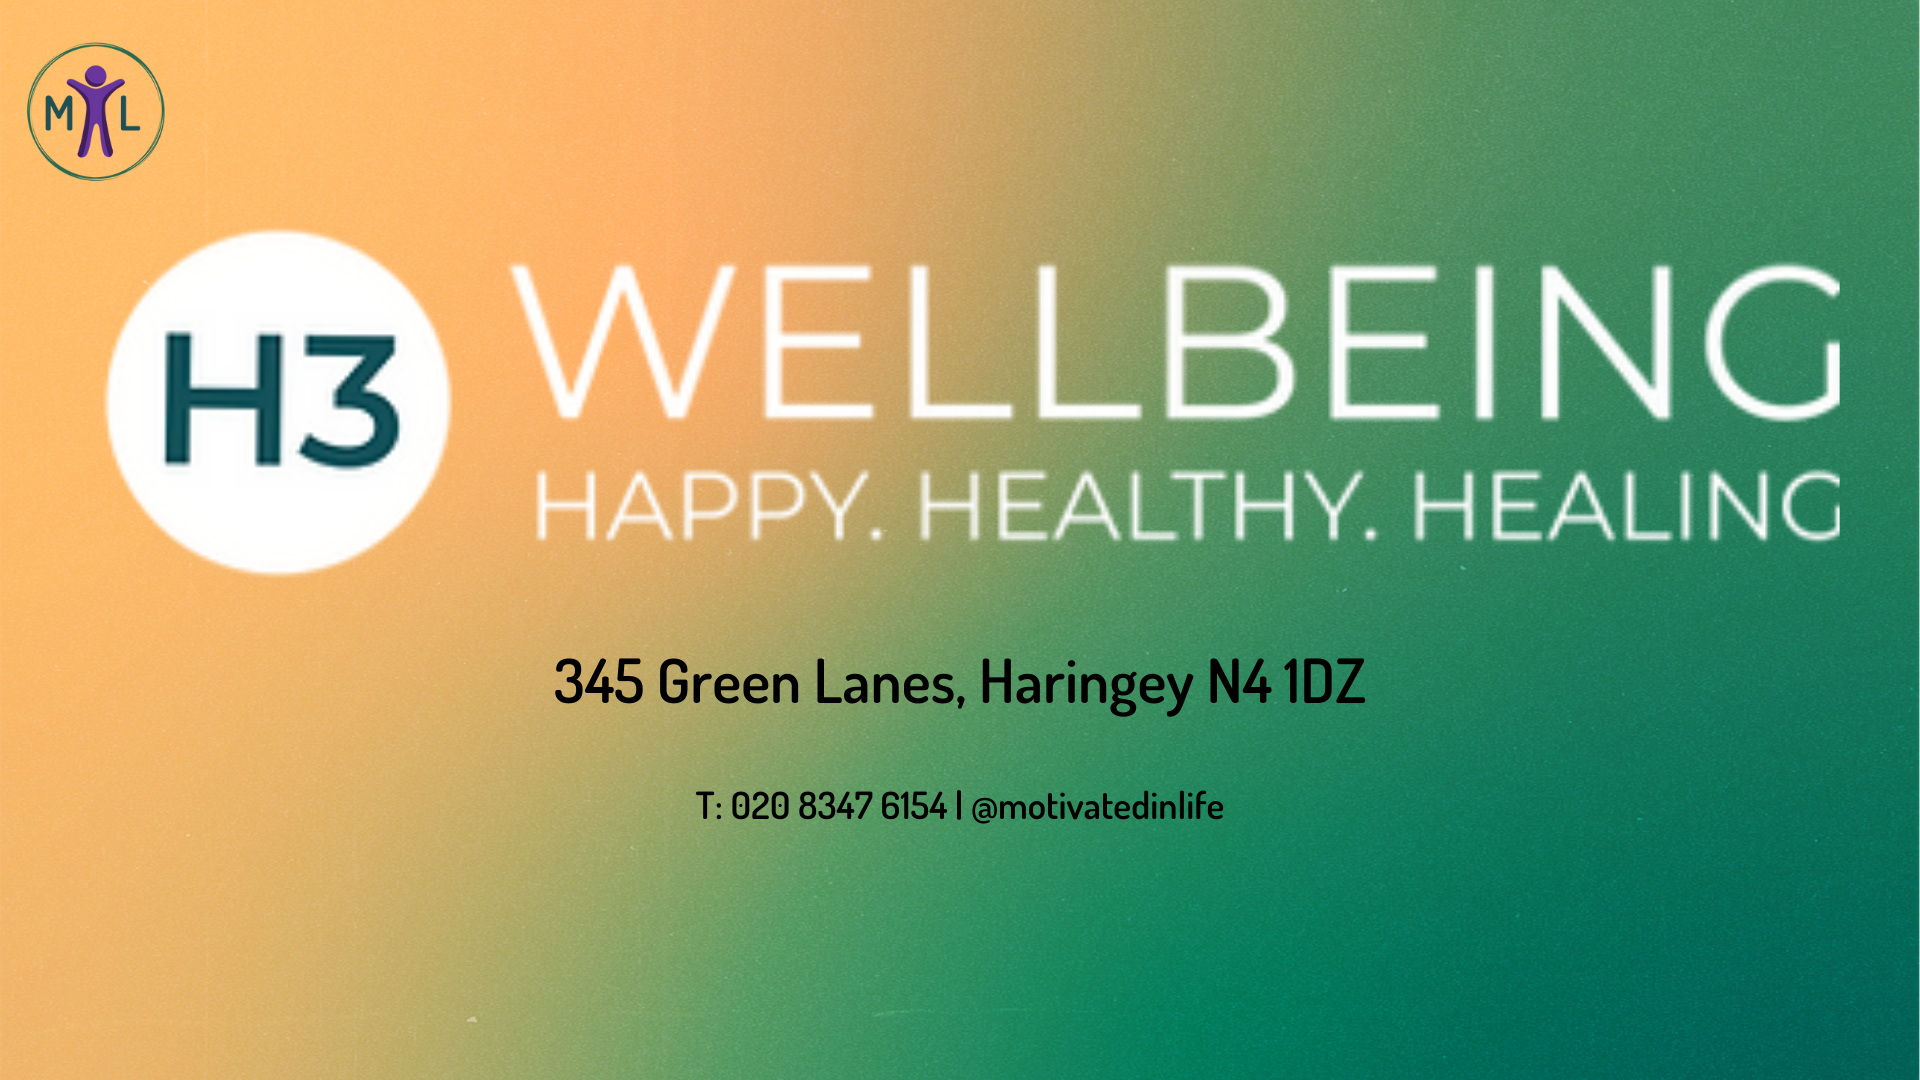 H3 Wellbeing